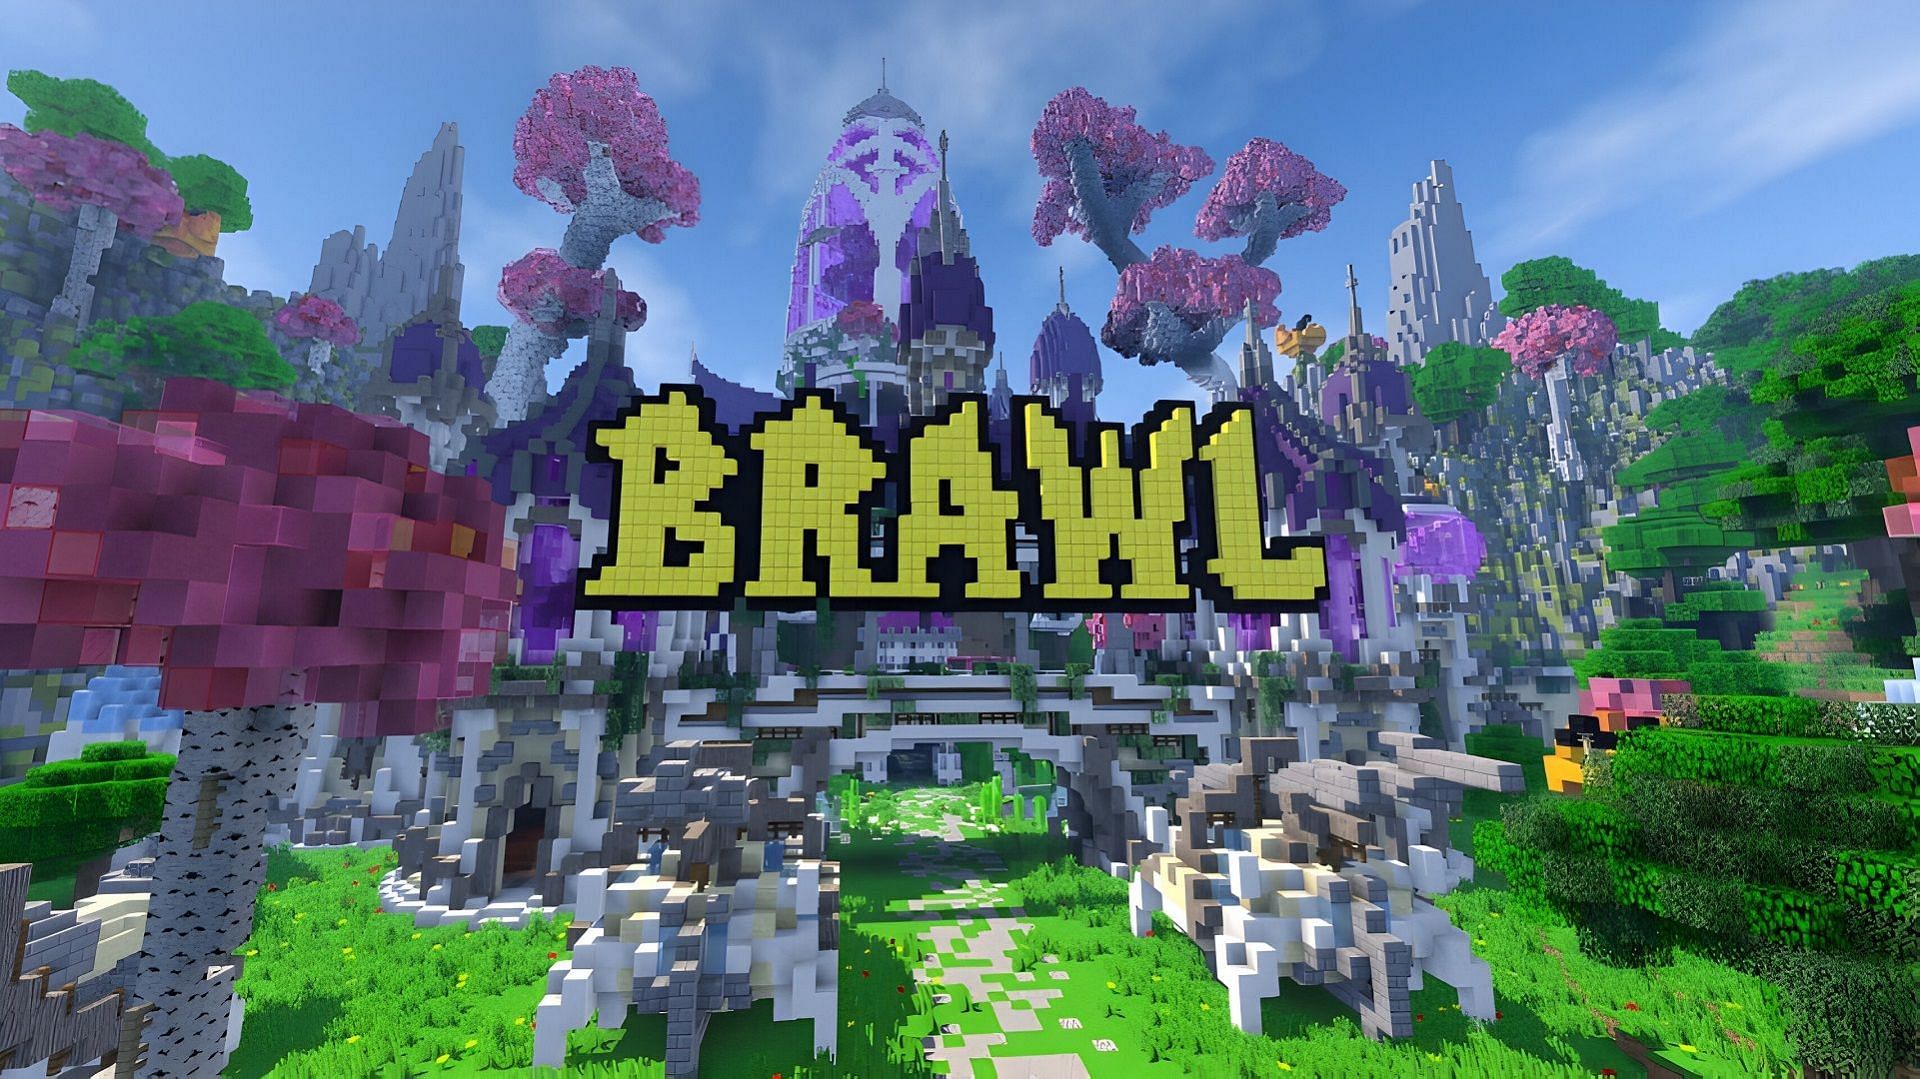 Minecraft players have no shortage of awesome servers to try in 2023 (Image via Brawl Games)